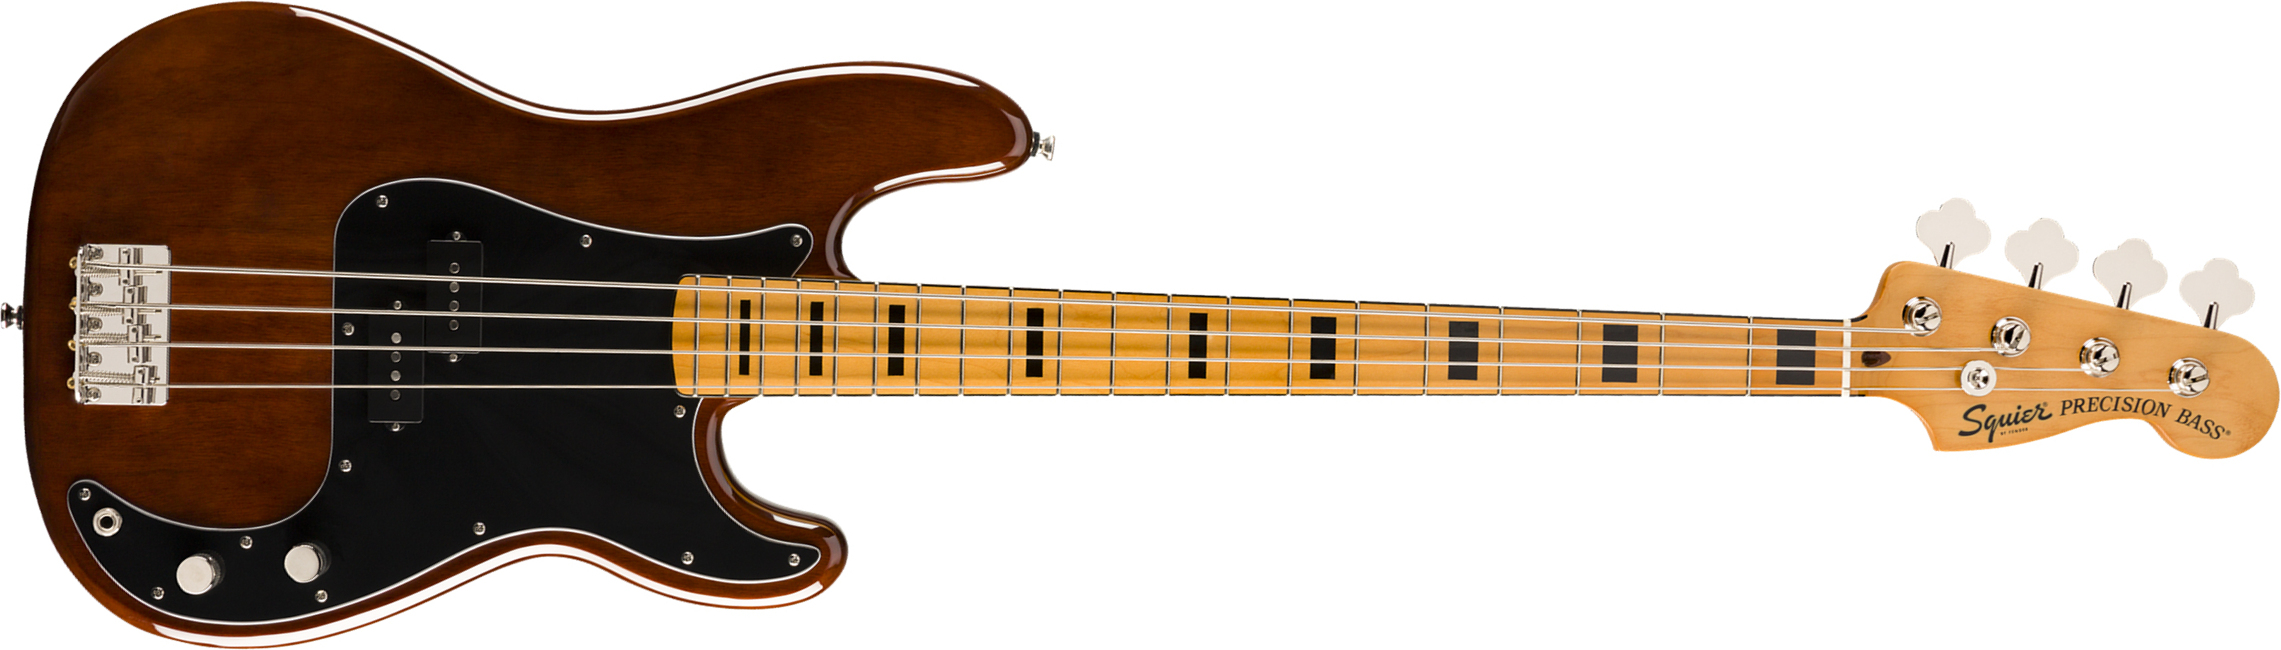 Squier Precision Bass '70s Classic Vibe 2019 Mn - Walnut - Basse Électrique Solid Body - Main picture